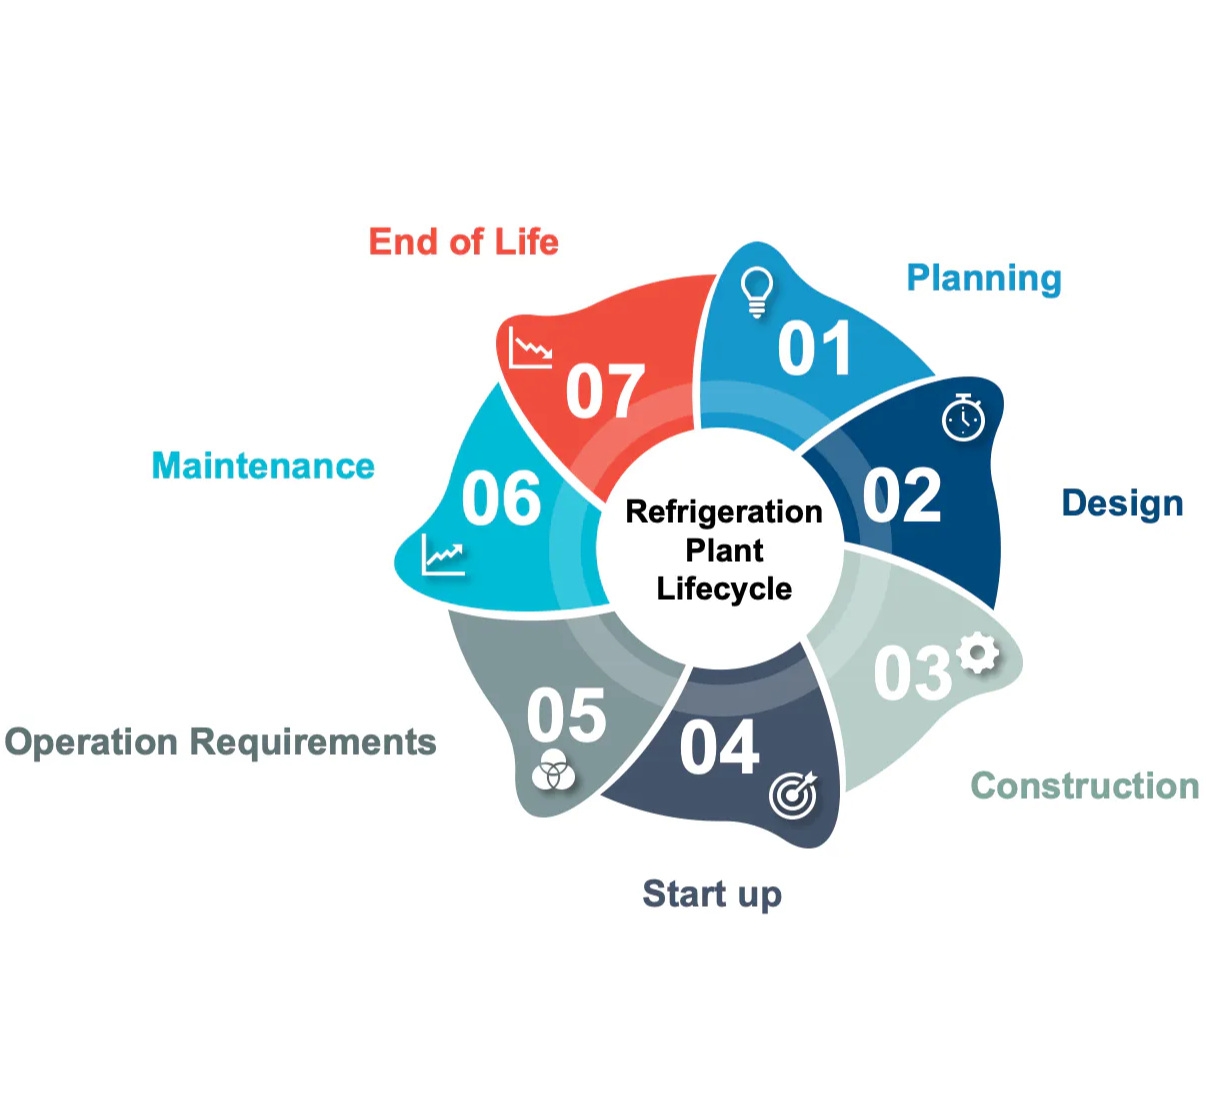 Refrigeration Plant Lifecycle